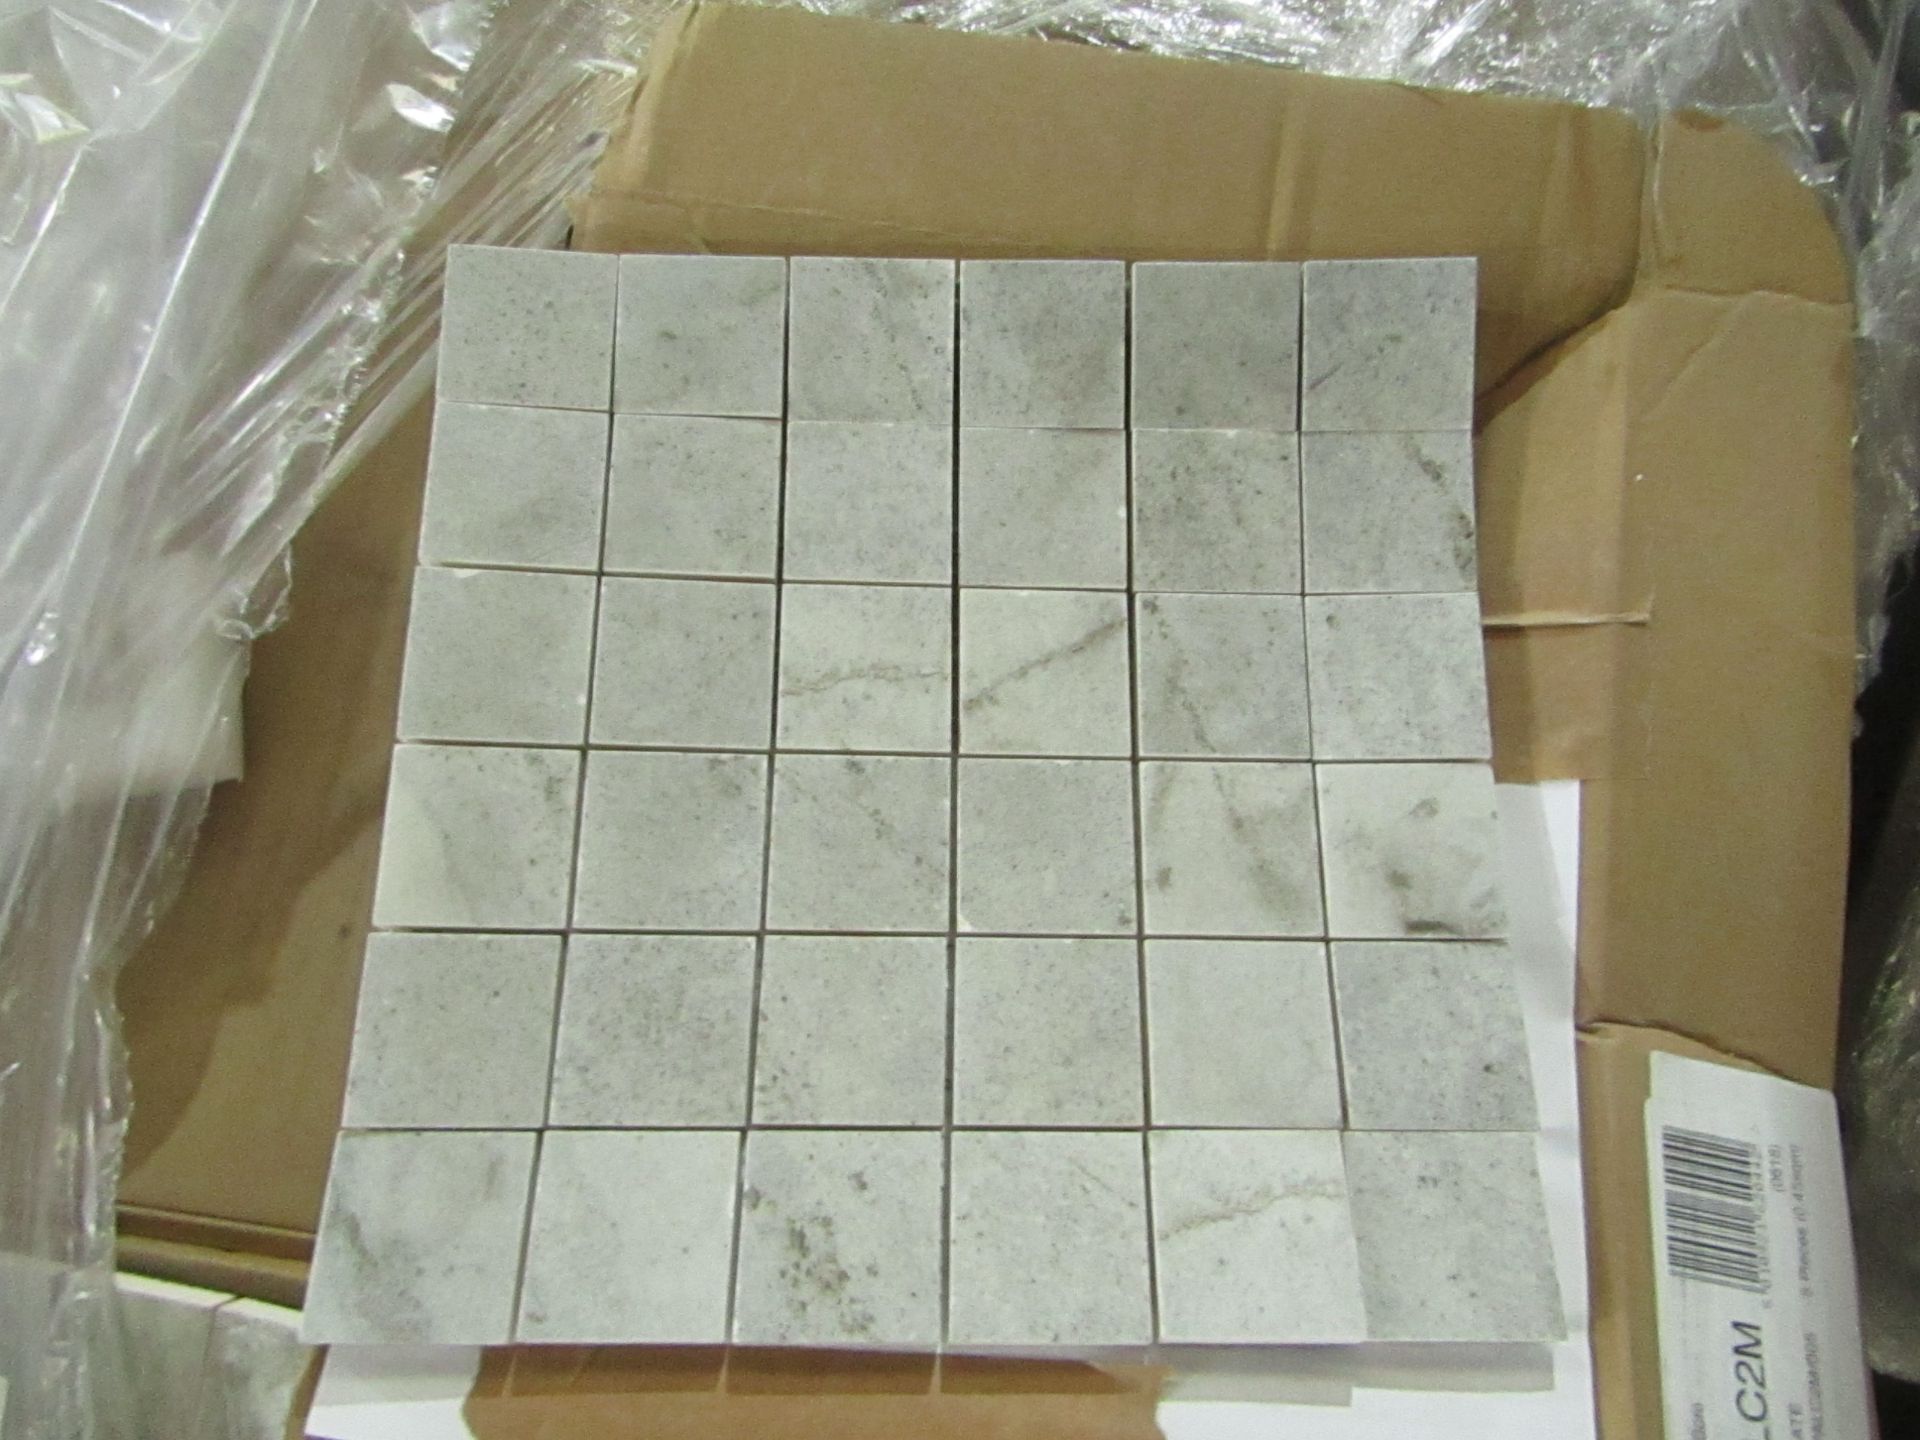 38x Packs of 5 Palace Cool slate 300x300mm Mosaic tile sheets ref PALC2M, brand new and boxed.RRP £